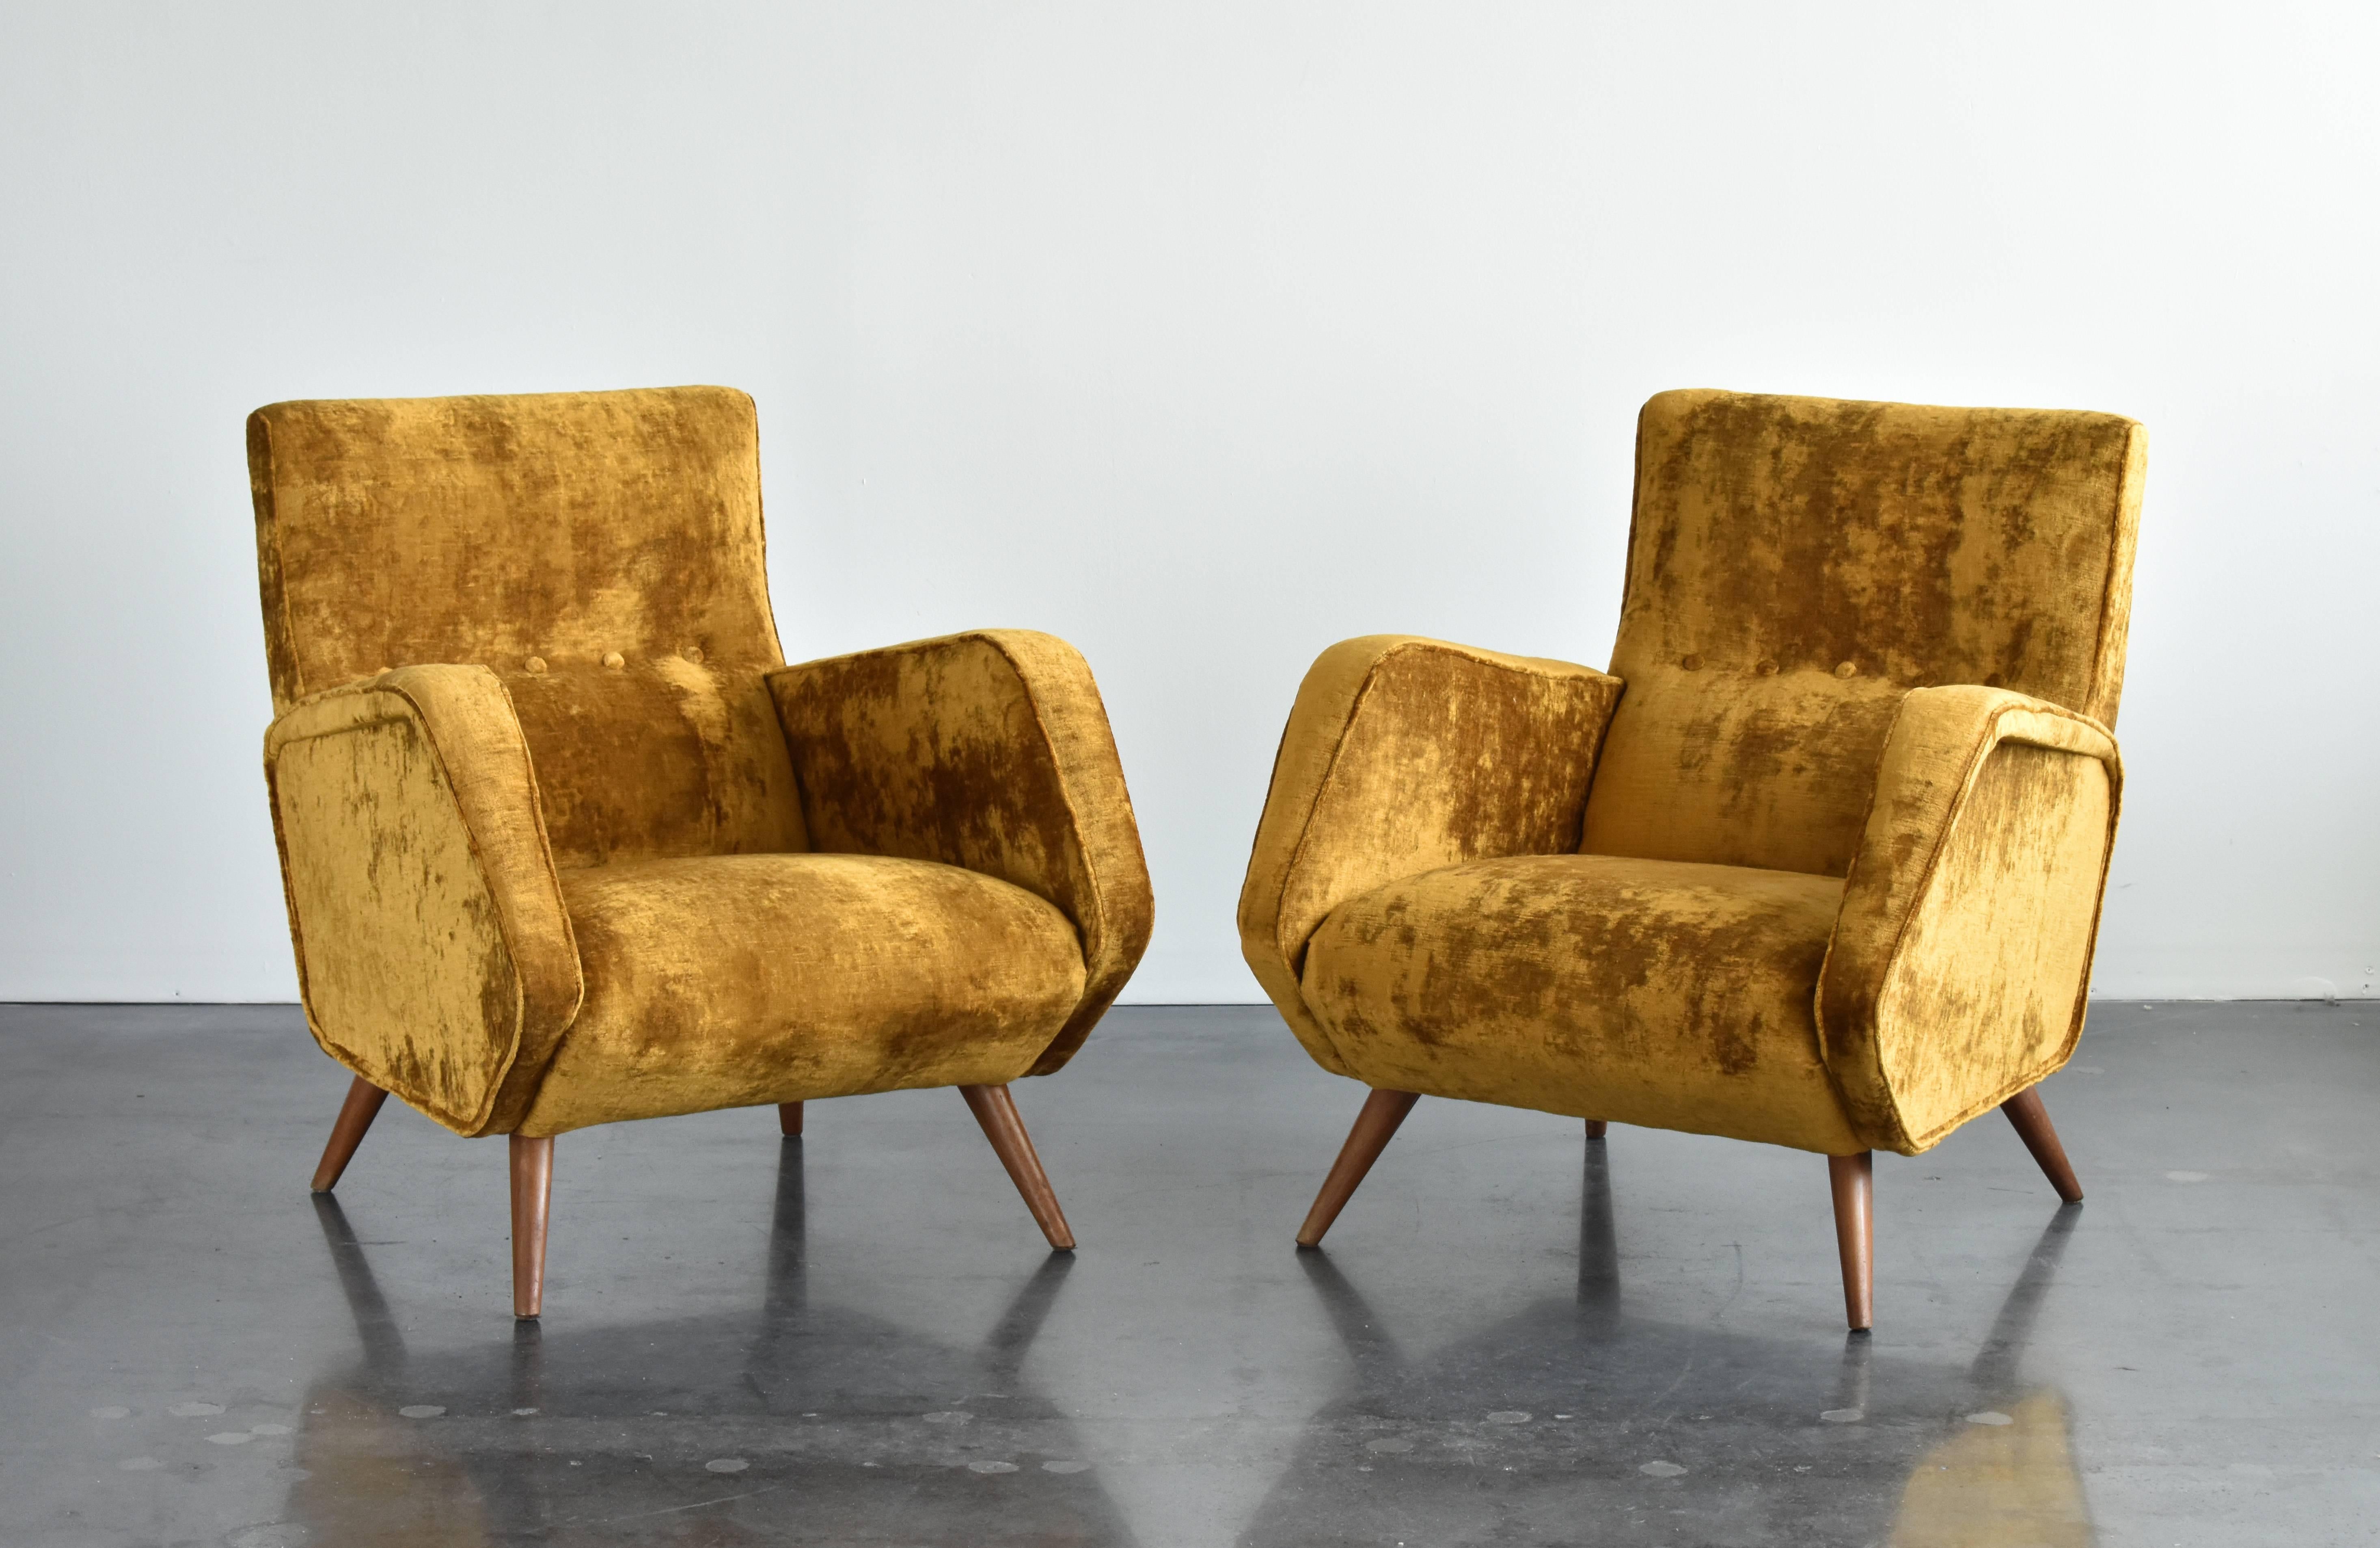 A pair of rare lounge chairs by the Italian architect and designer Osvaldo Borsani. Manufactured by Tecno, in the 1950s. Tapered wooden legs. Reupholstered in a brand new European high-end velvet. Model recorded in the Osvaldo Borsani archives.